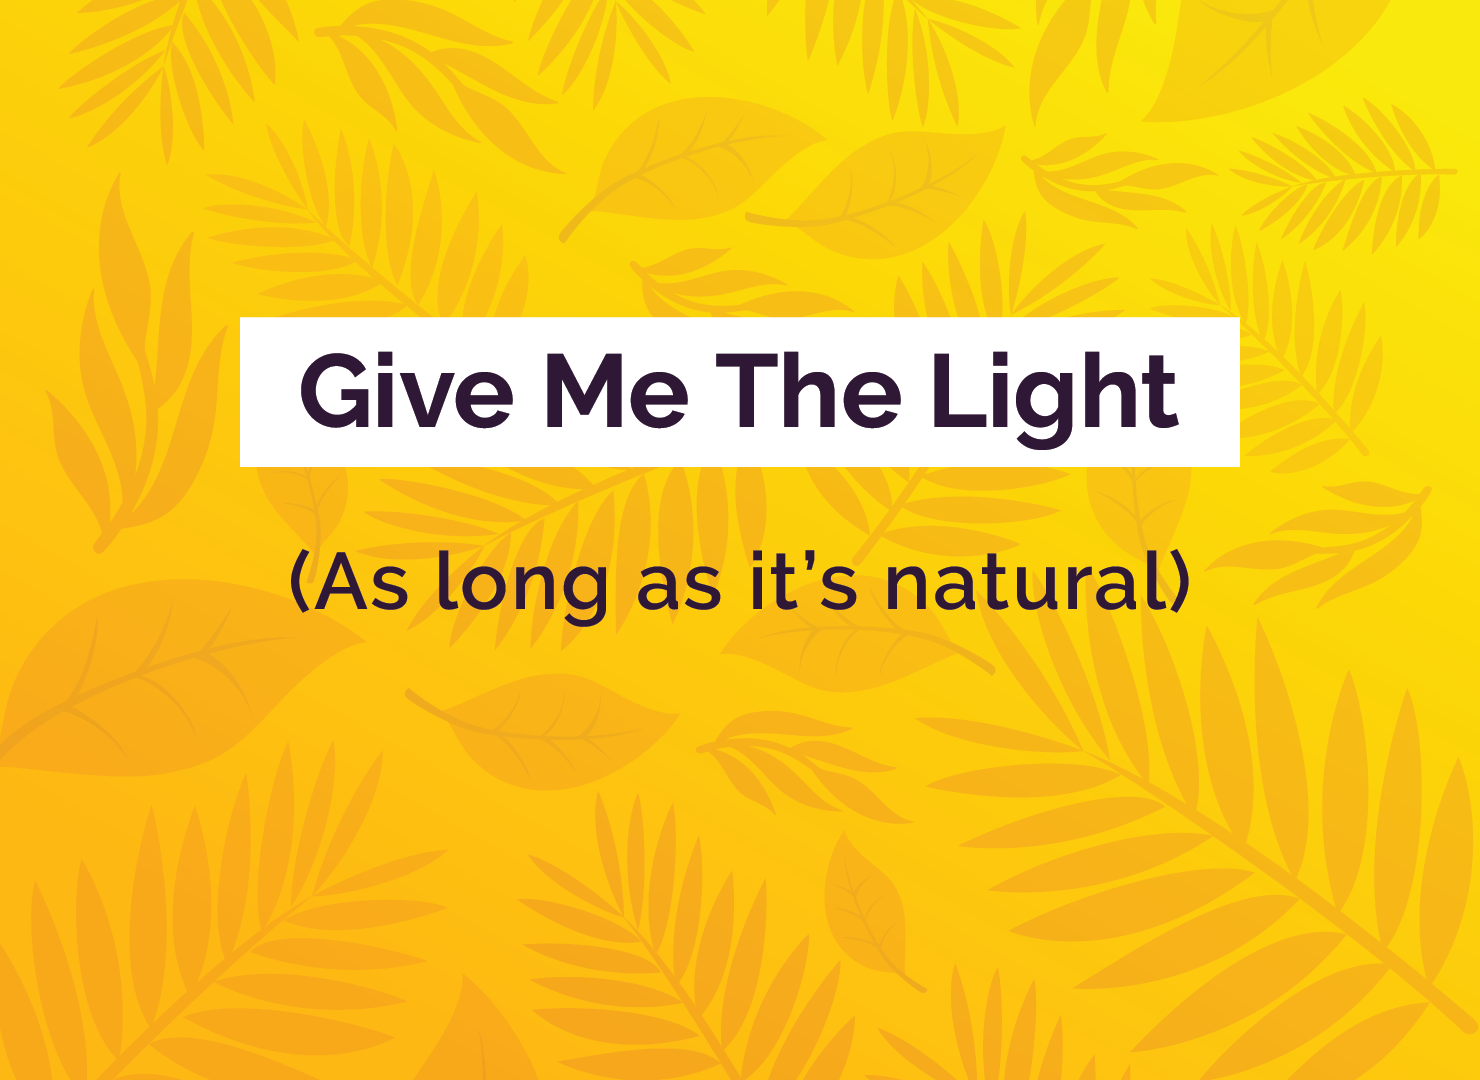 Give Me The Light (As long as it’s natural)